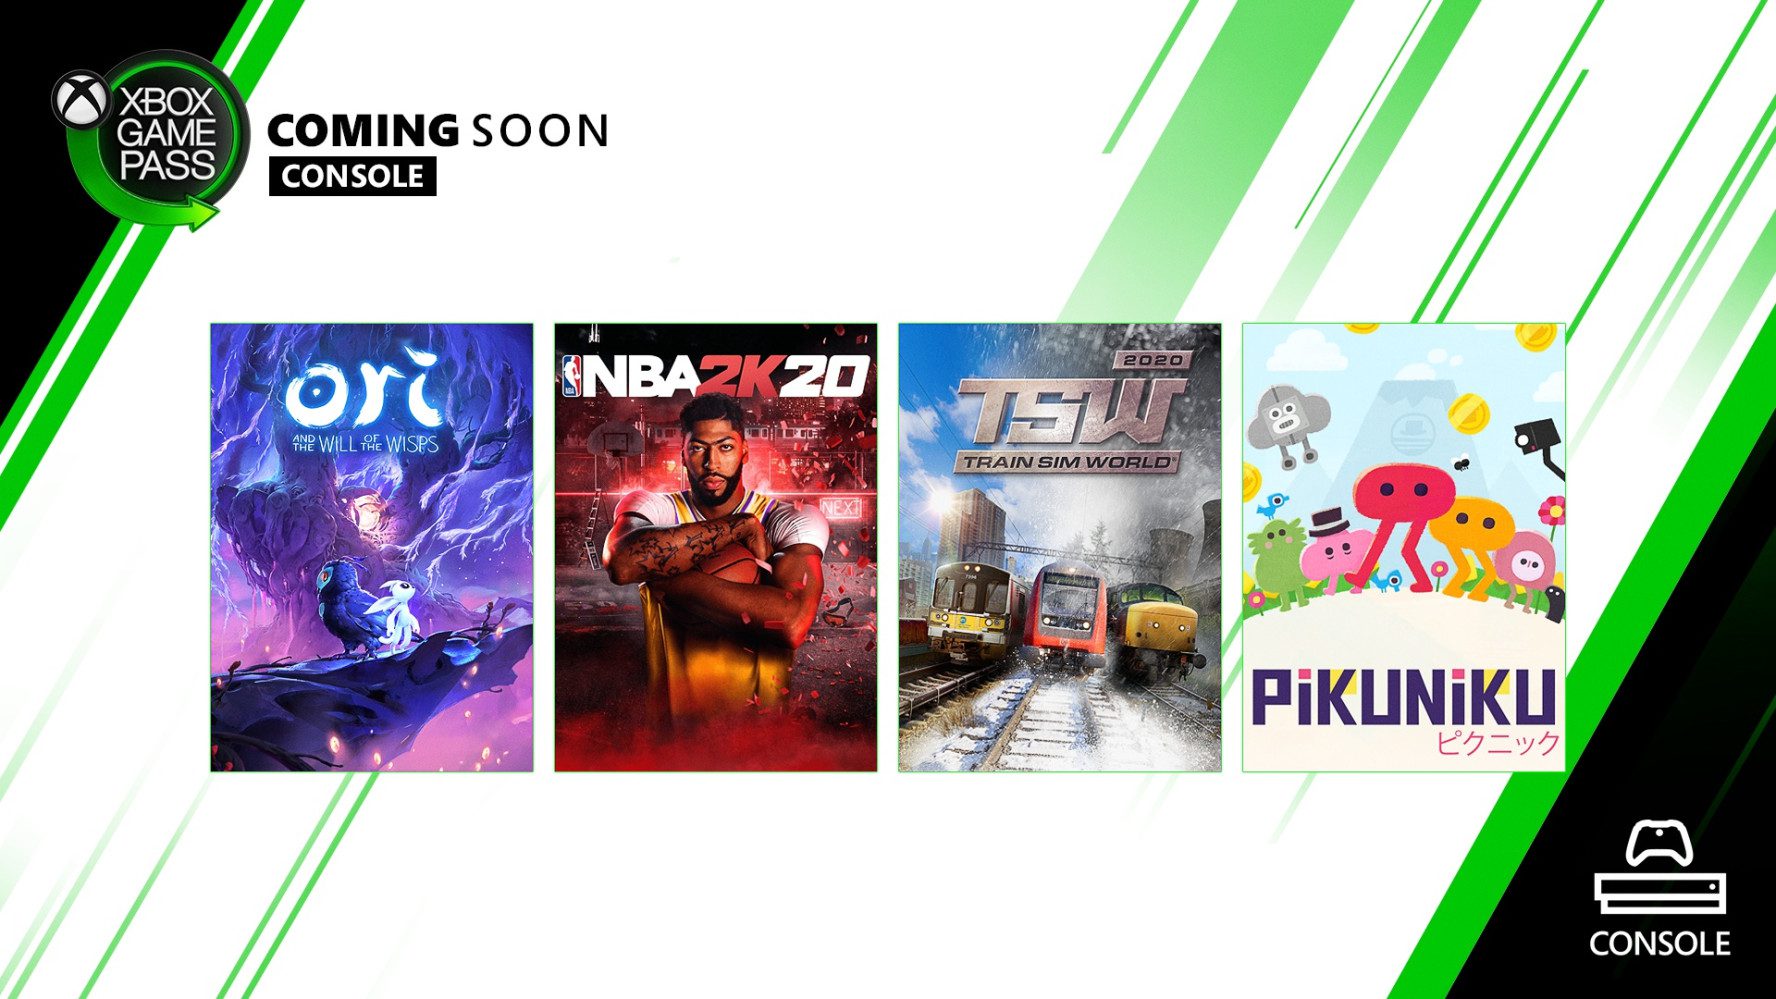 New games coming to the Xbox Game Pass in March have been introduced